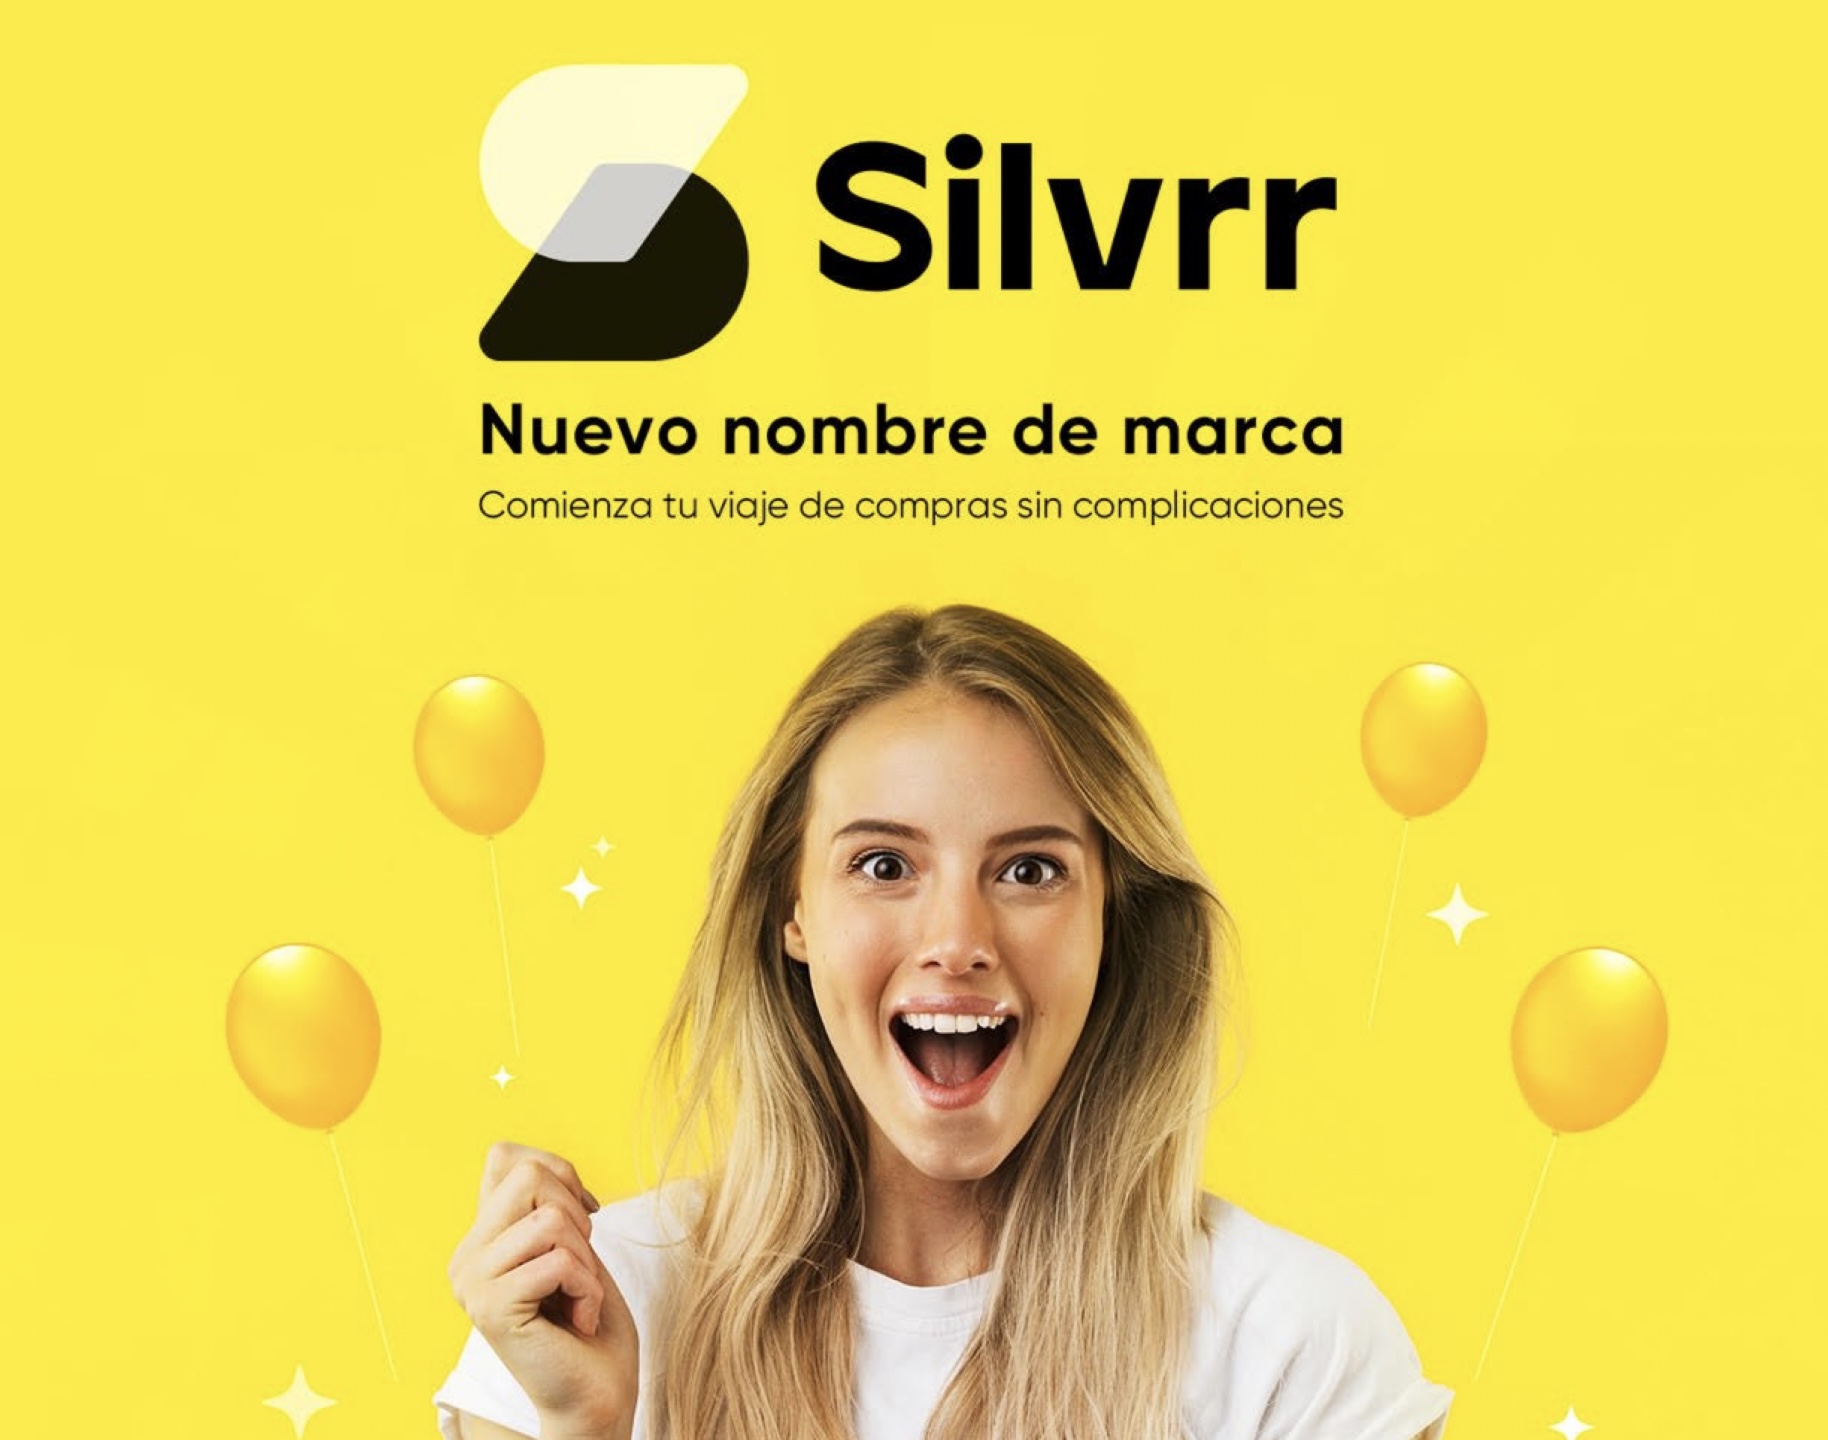 Silvrr